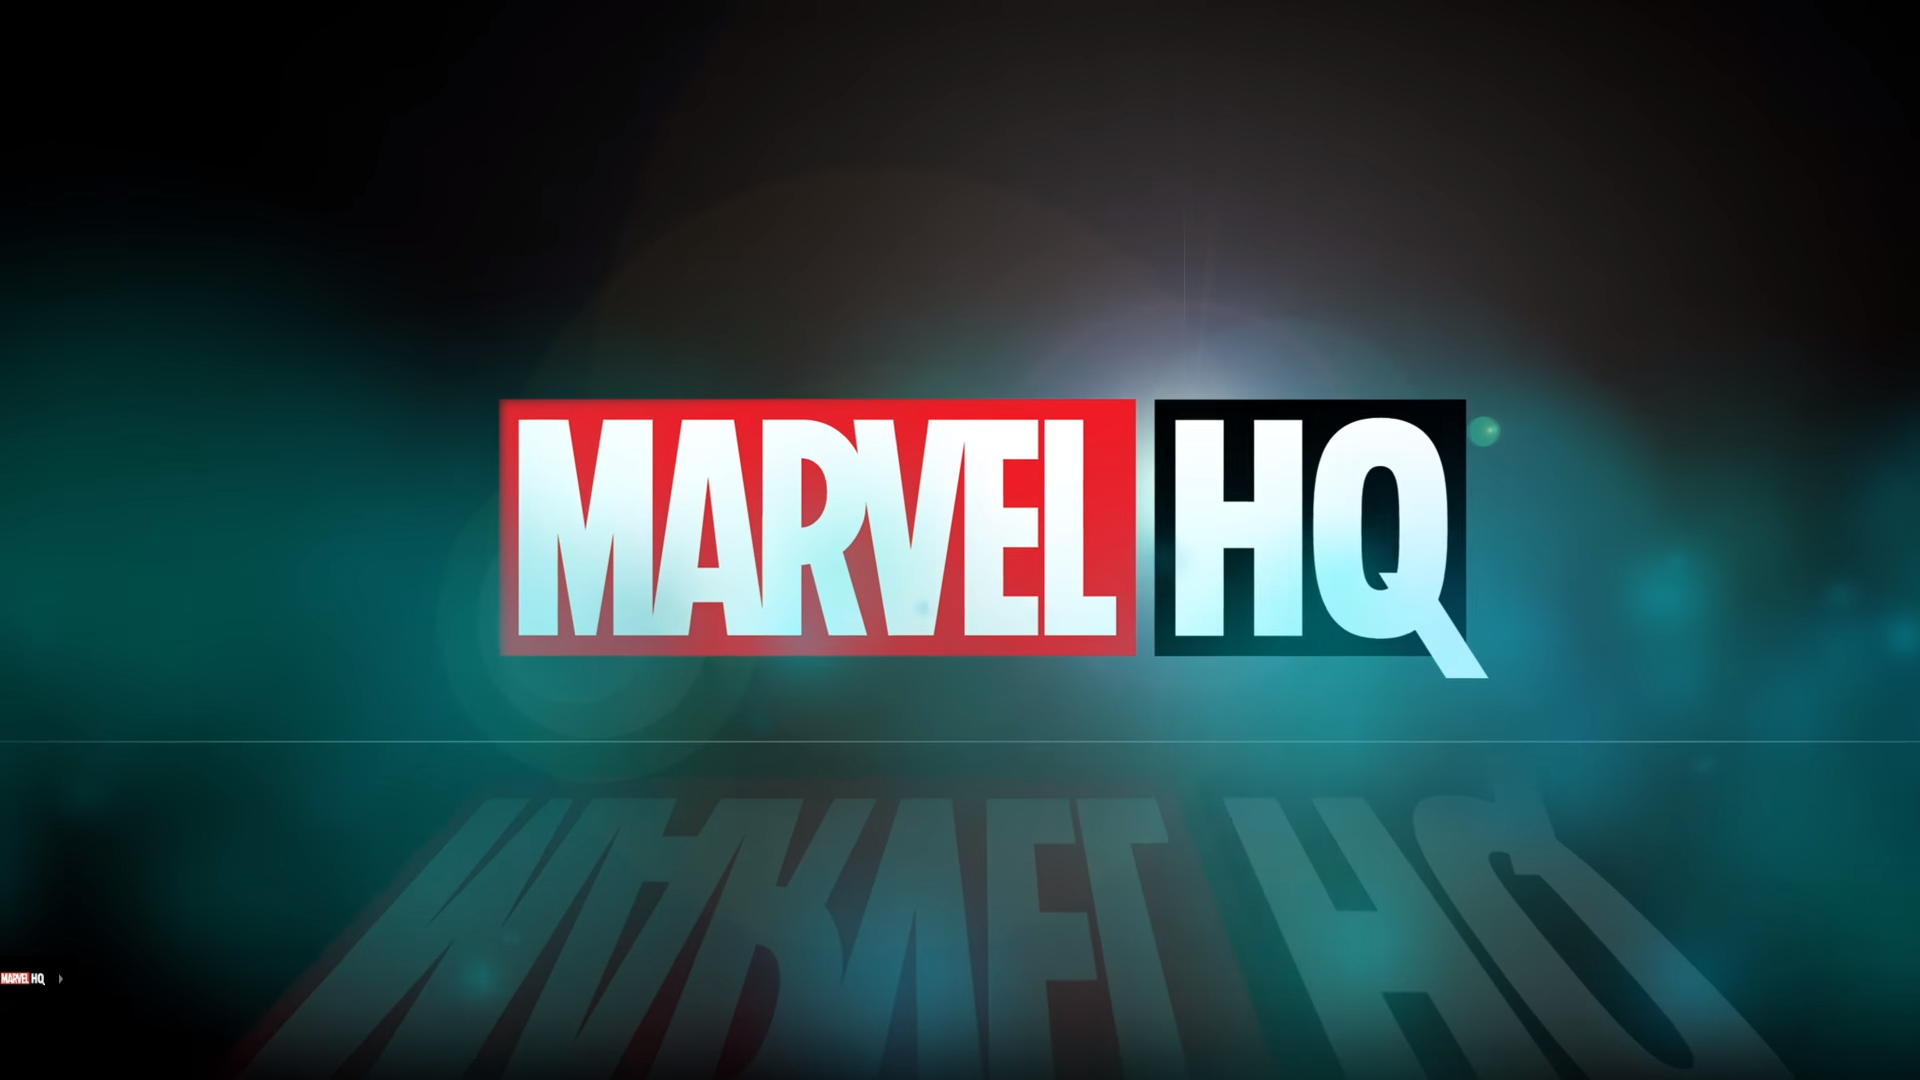 Marvel Ends NYCC with Panel Announcing Marvel HQ Youtube Channel